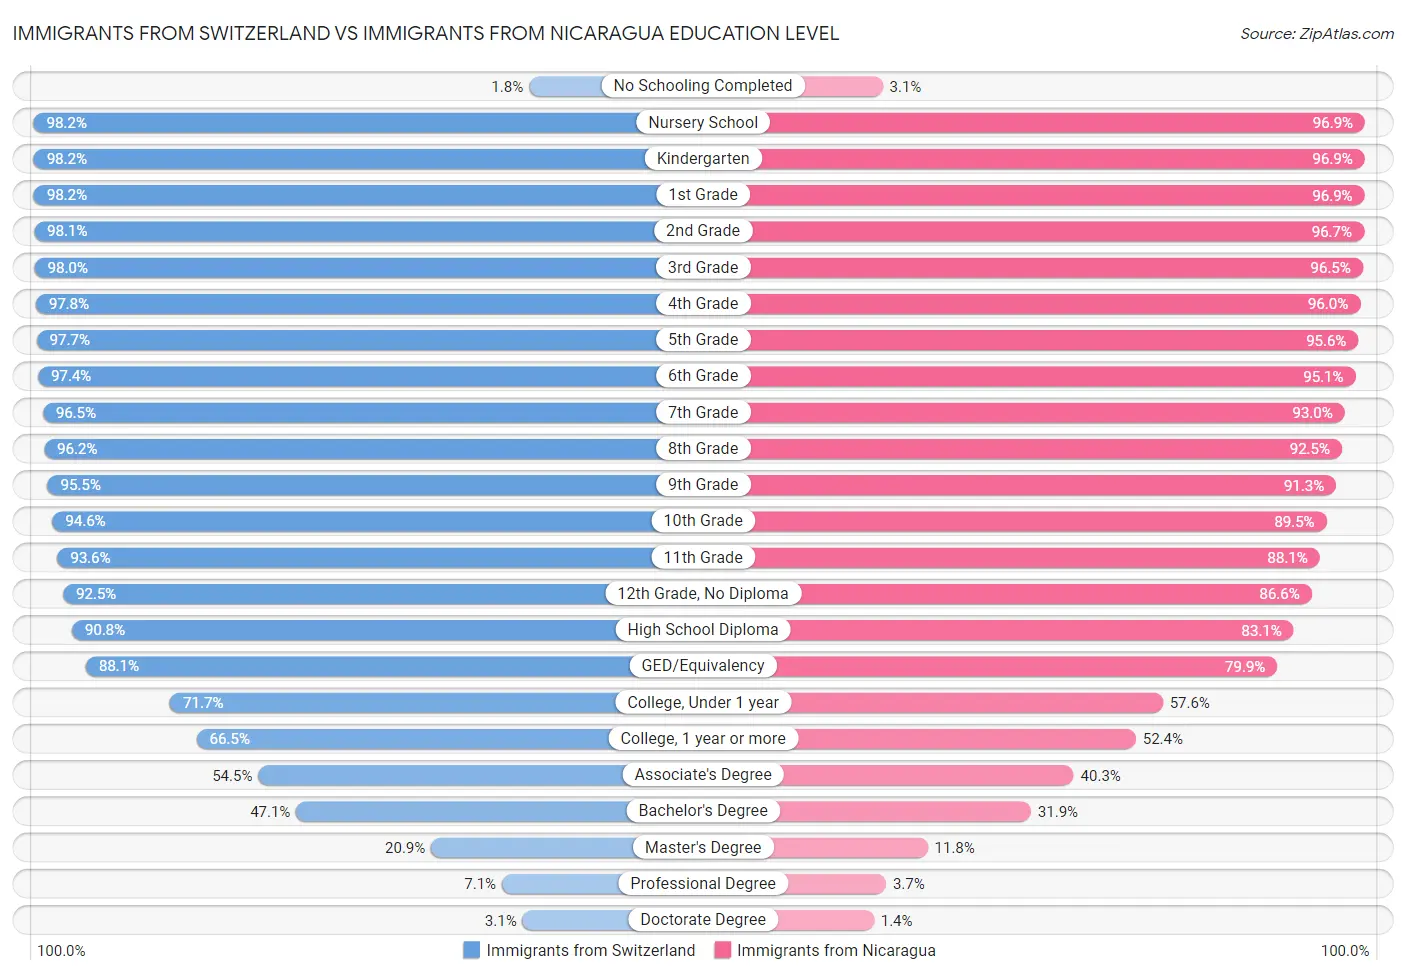 Immigrants from Switzerland vs Immigrants from Nicaragua Education Level